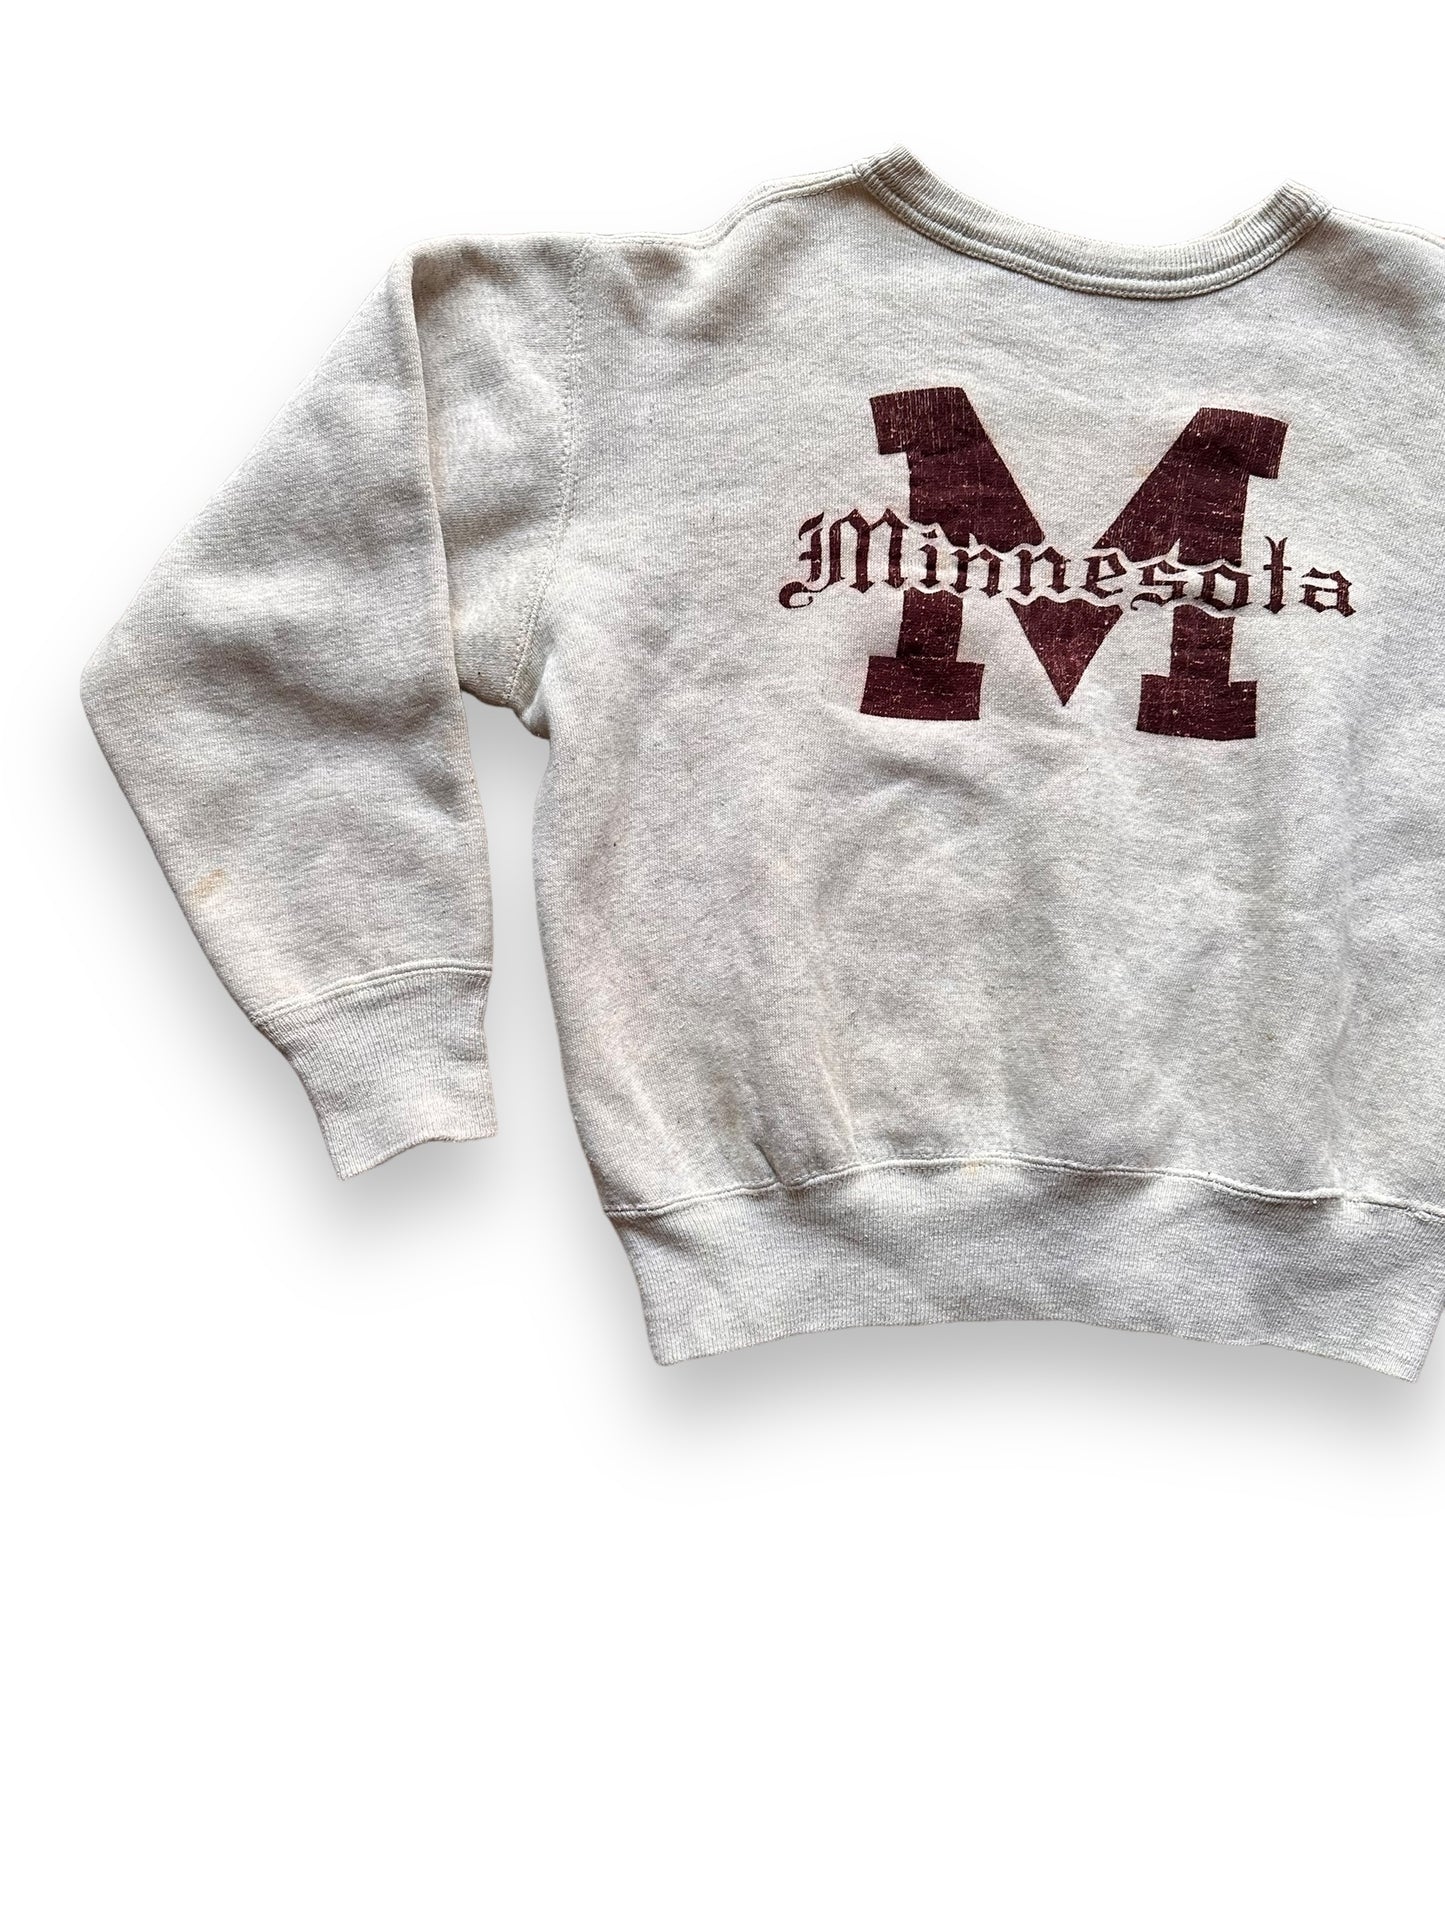 Front Right View of Vintage Minnesota Crewneck Sweatshirt SZ L | Vintage Crewneck Sweatshirts Seattle | Barn Owl Vintage Seattle